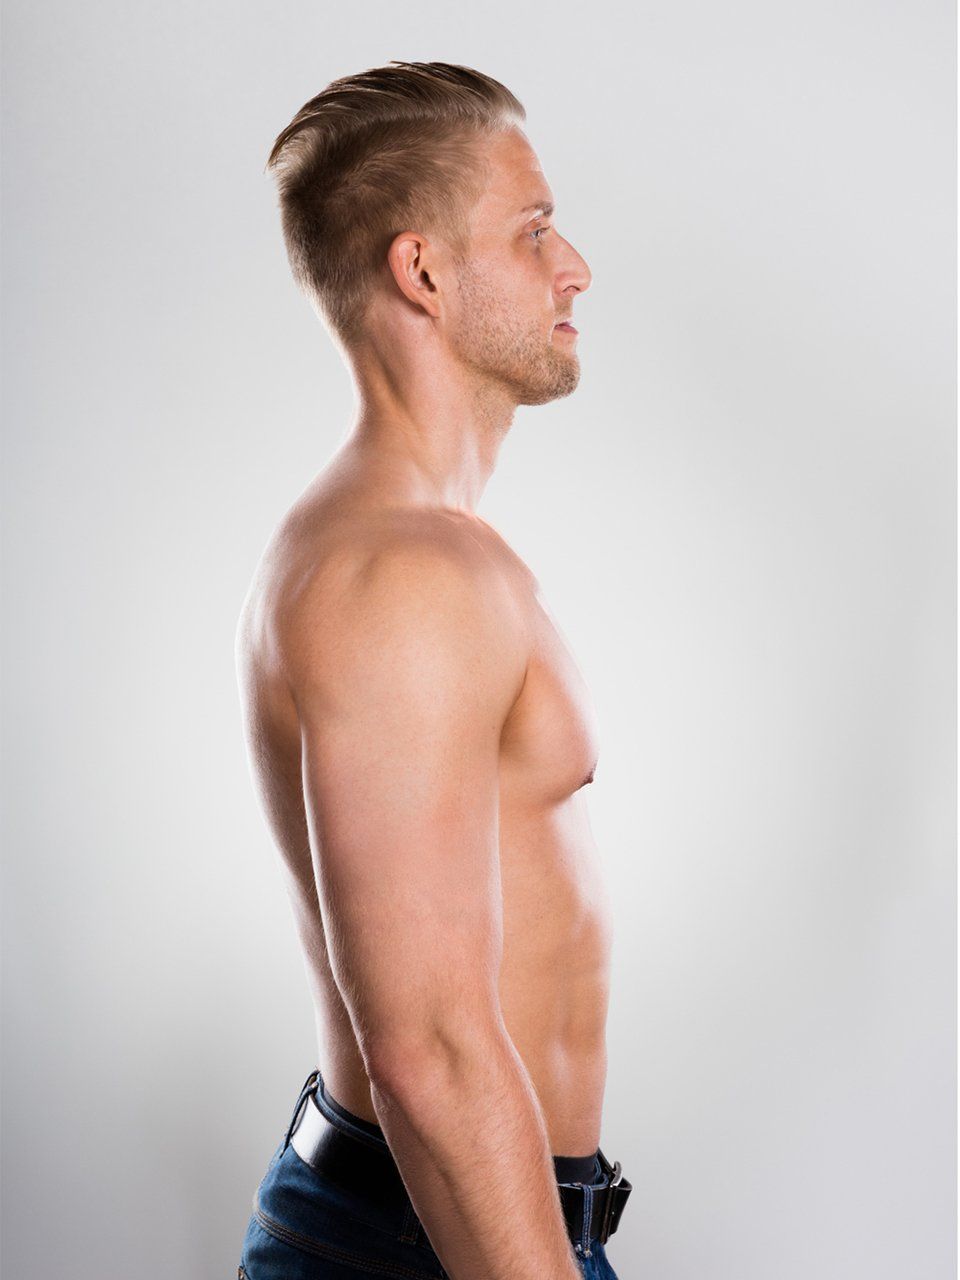 a shirtless man is standing in front of a white background .